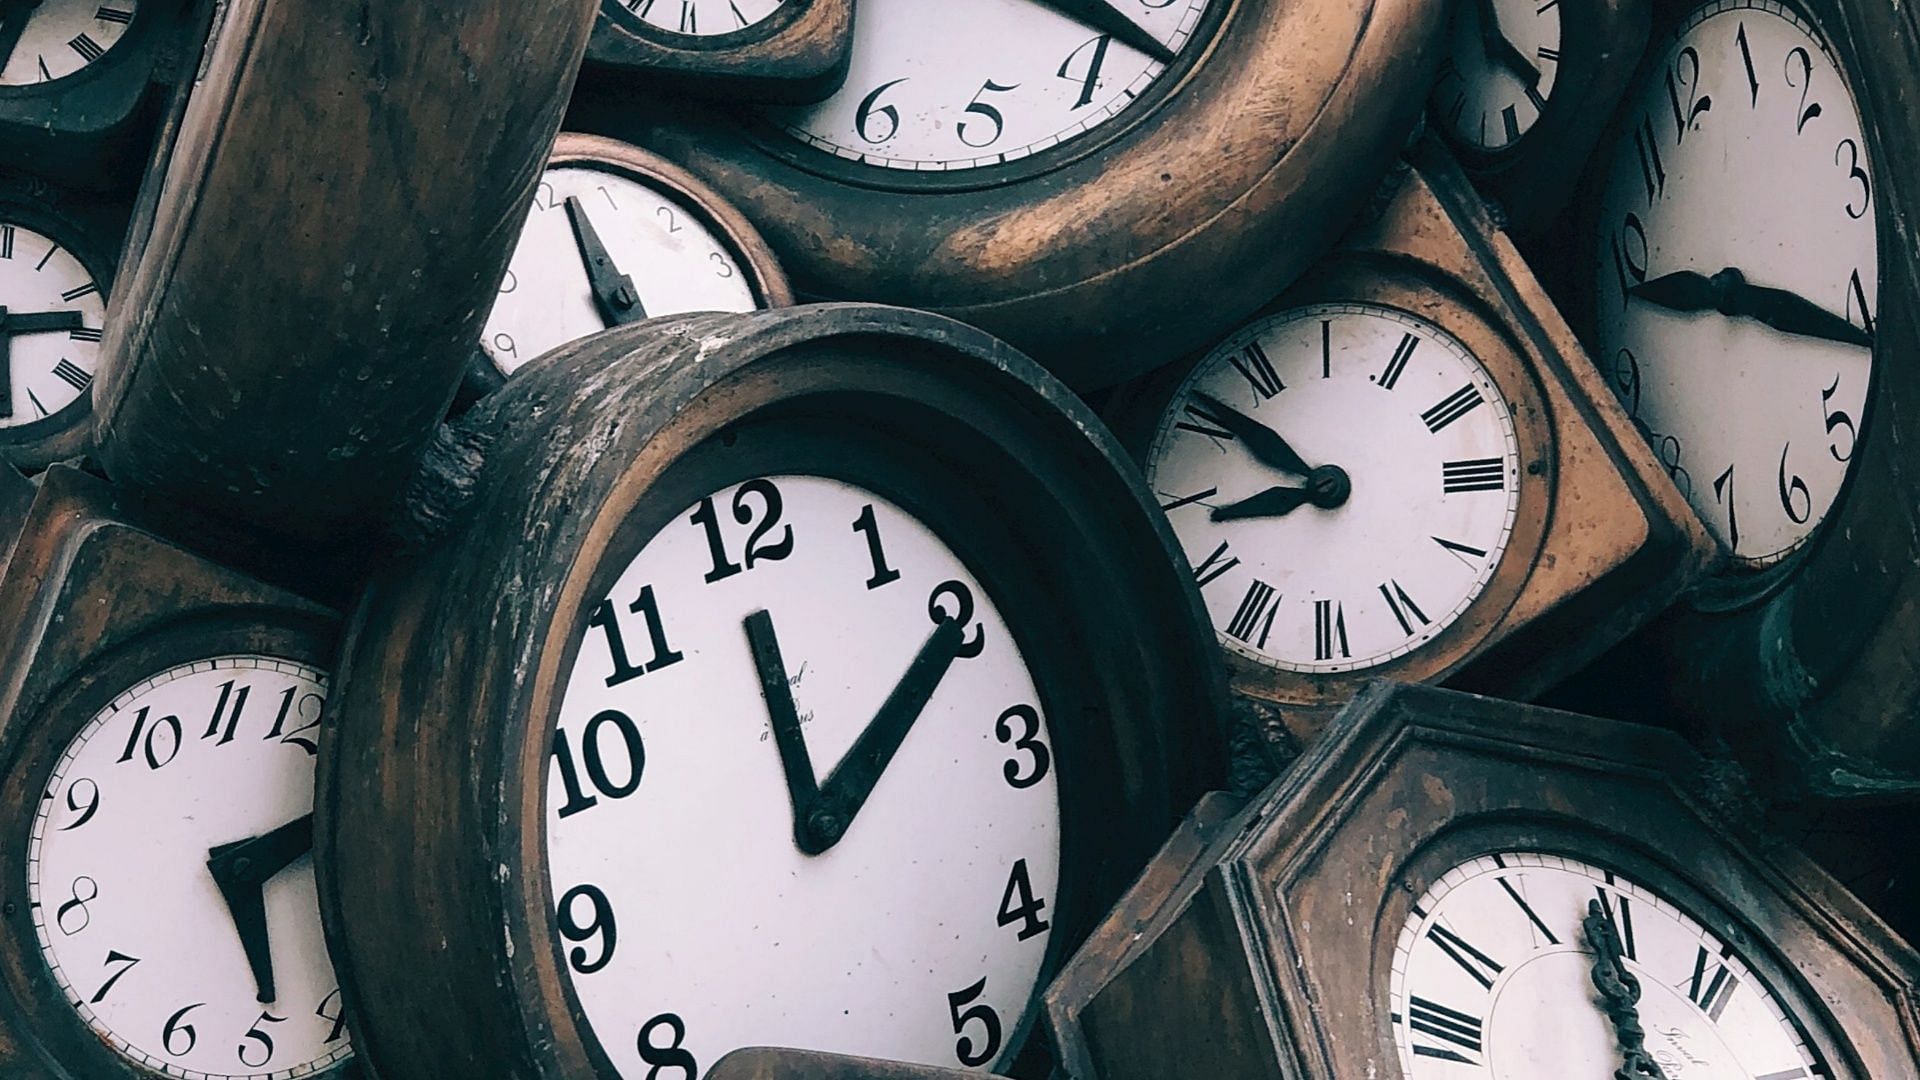 The United States will shift to daylight saving time on March 10 (Photo by Jon Tyson on Unsplash)